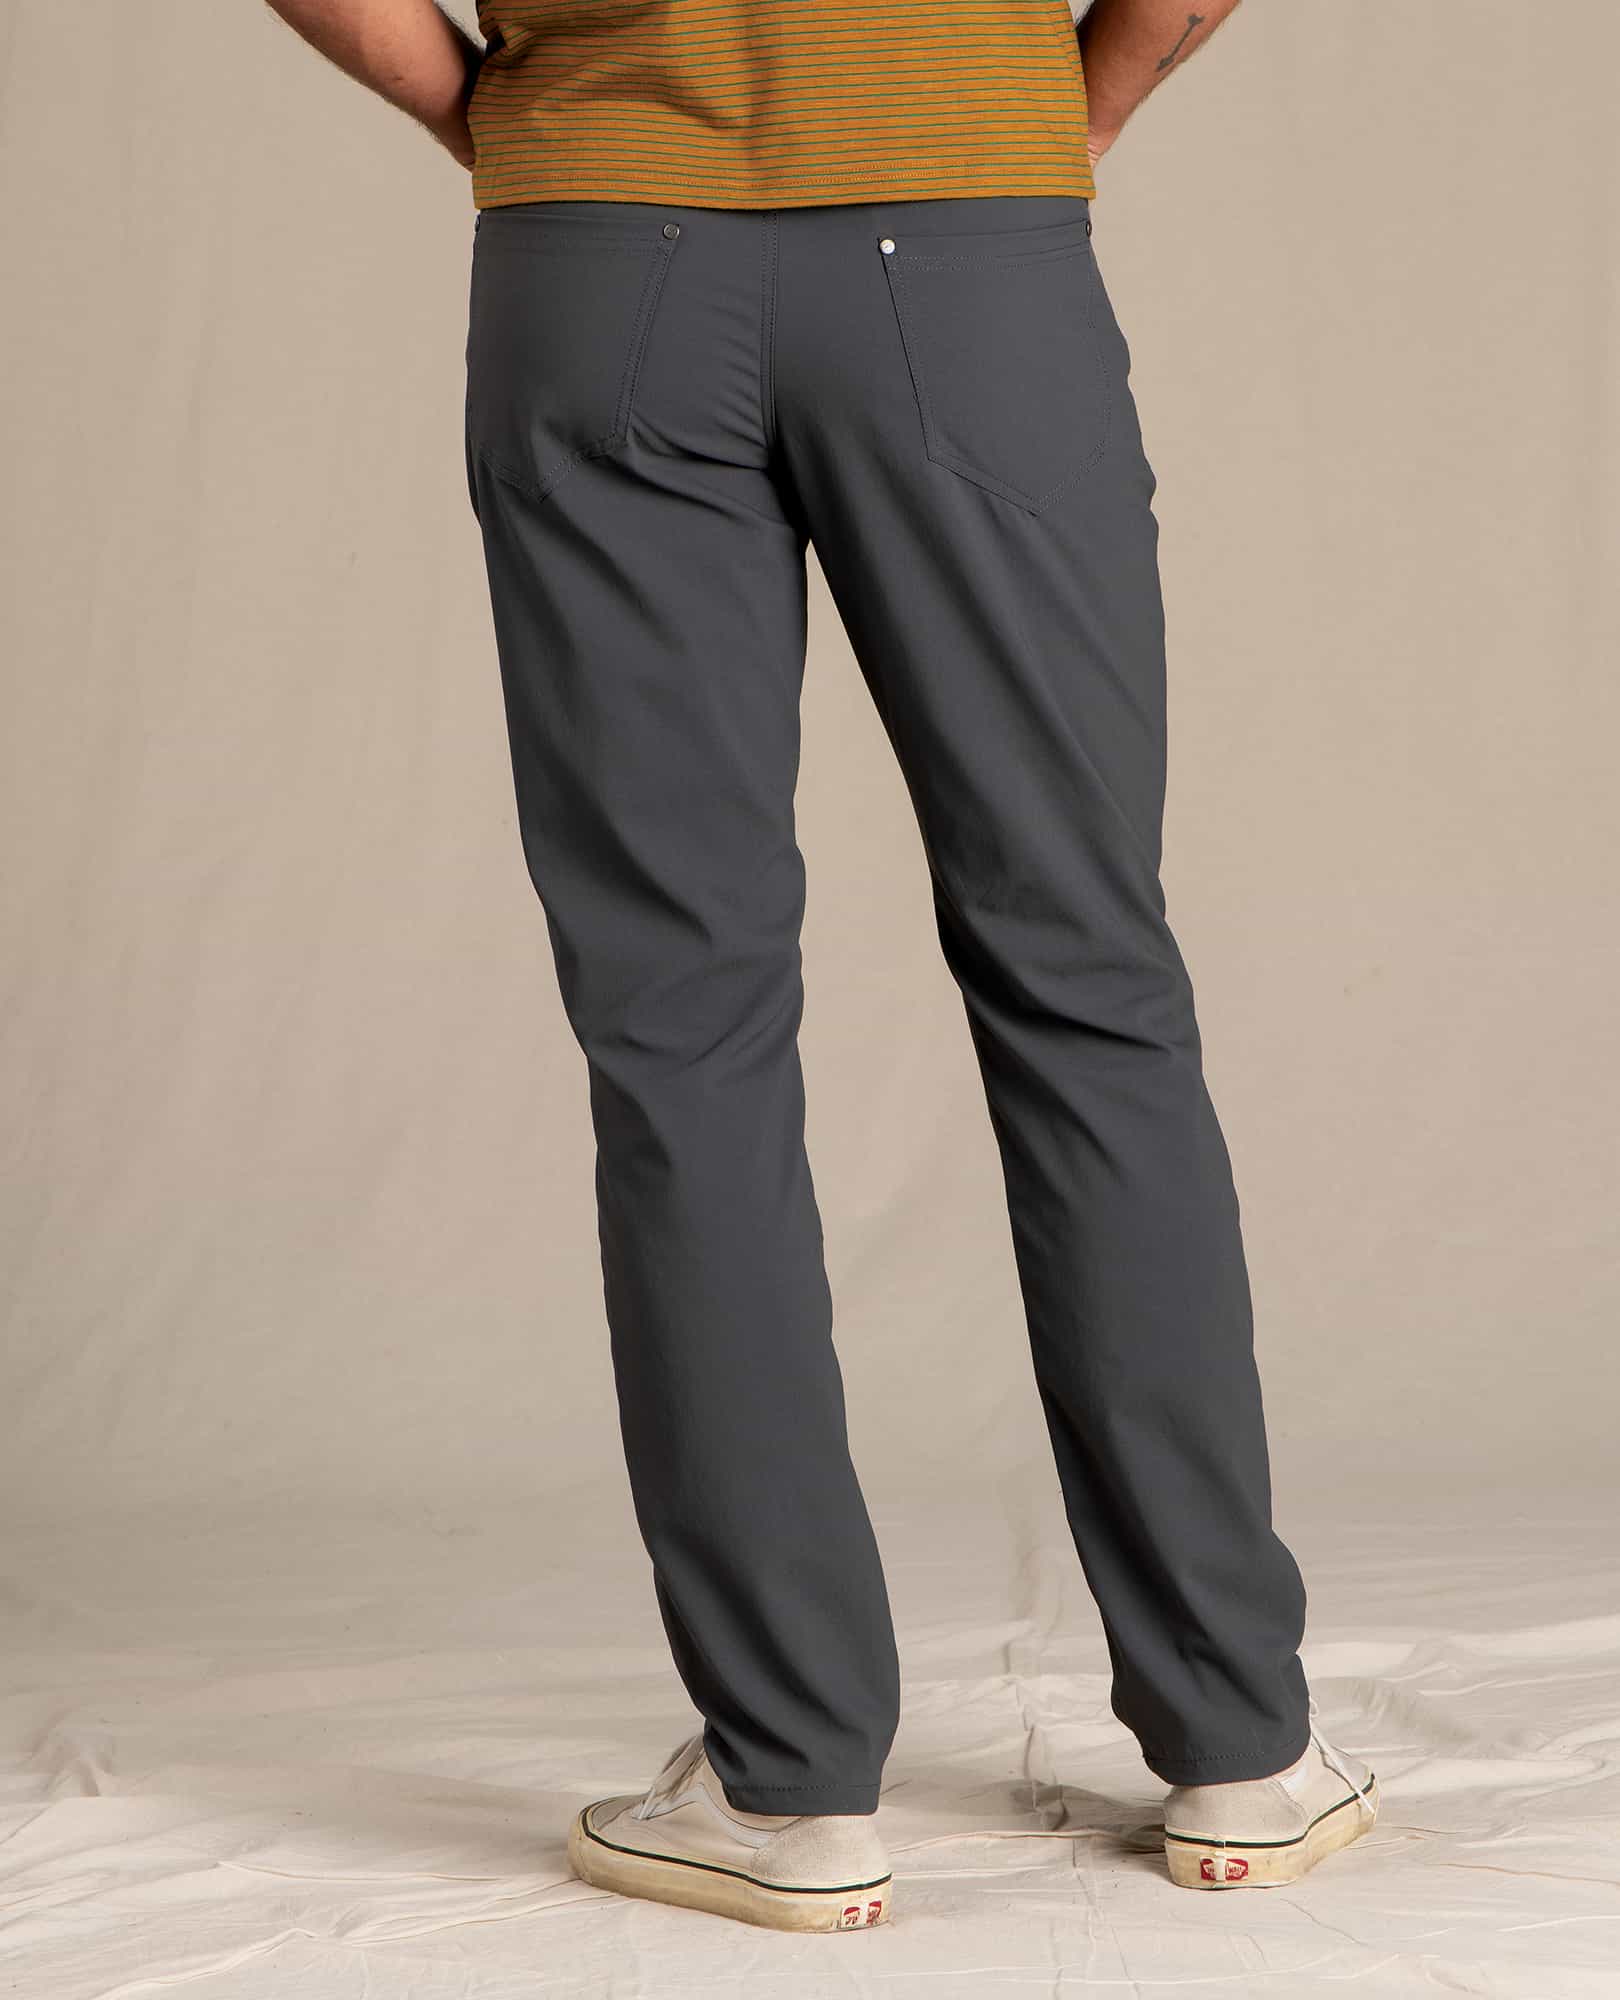 Rover 5 Pocket Lean Pant | by Toad&Co